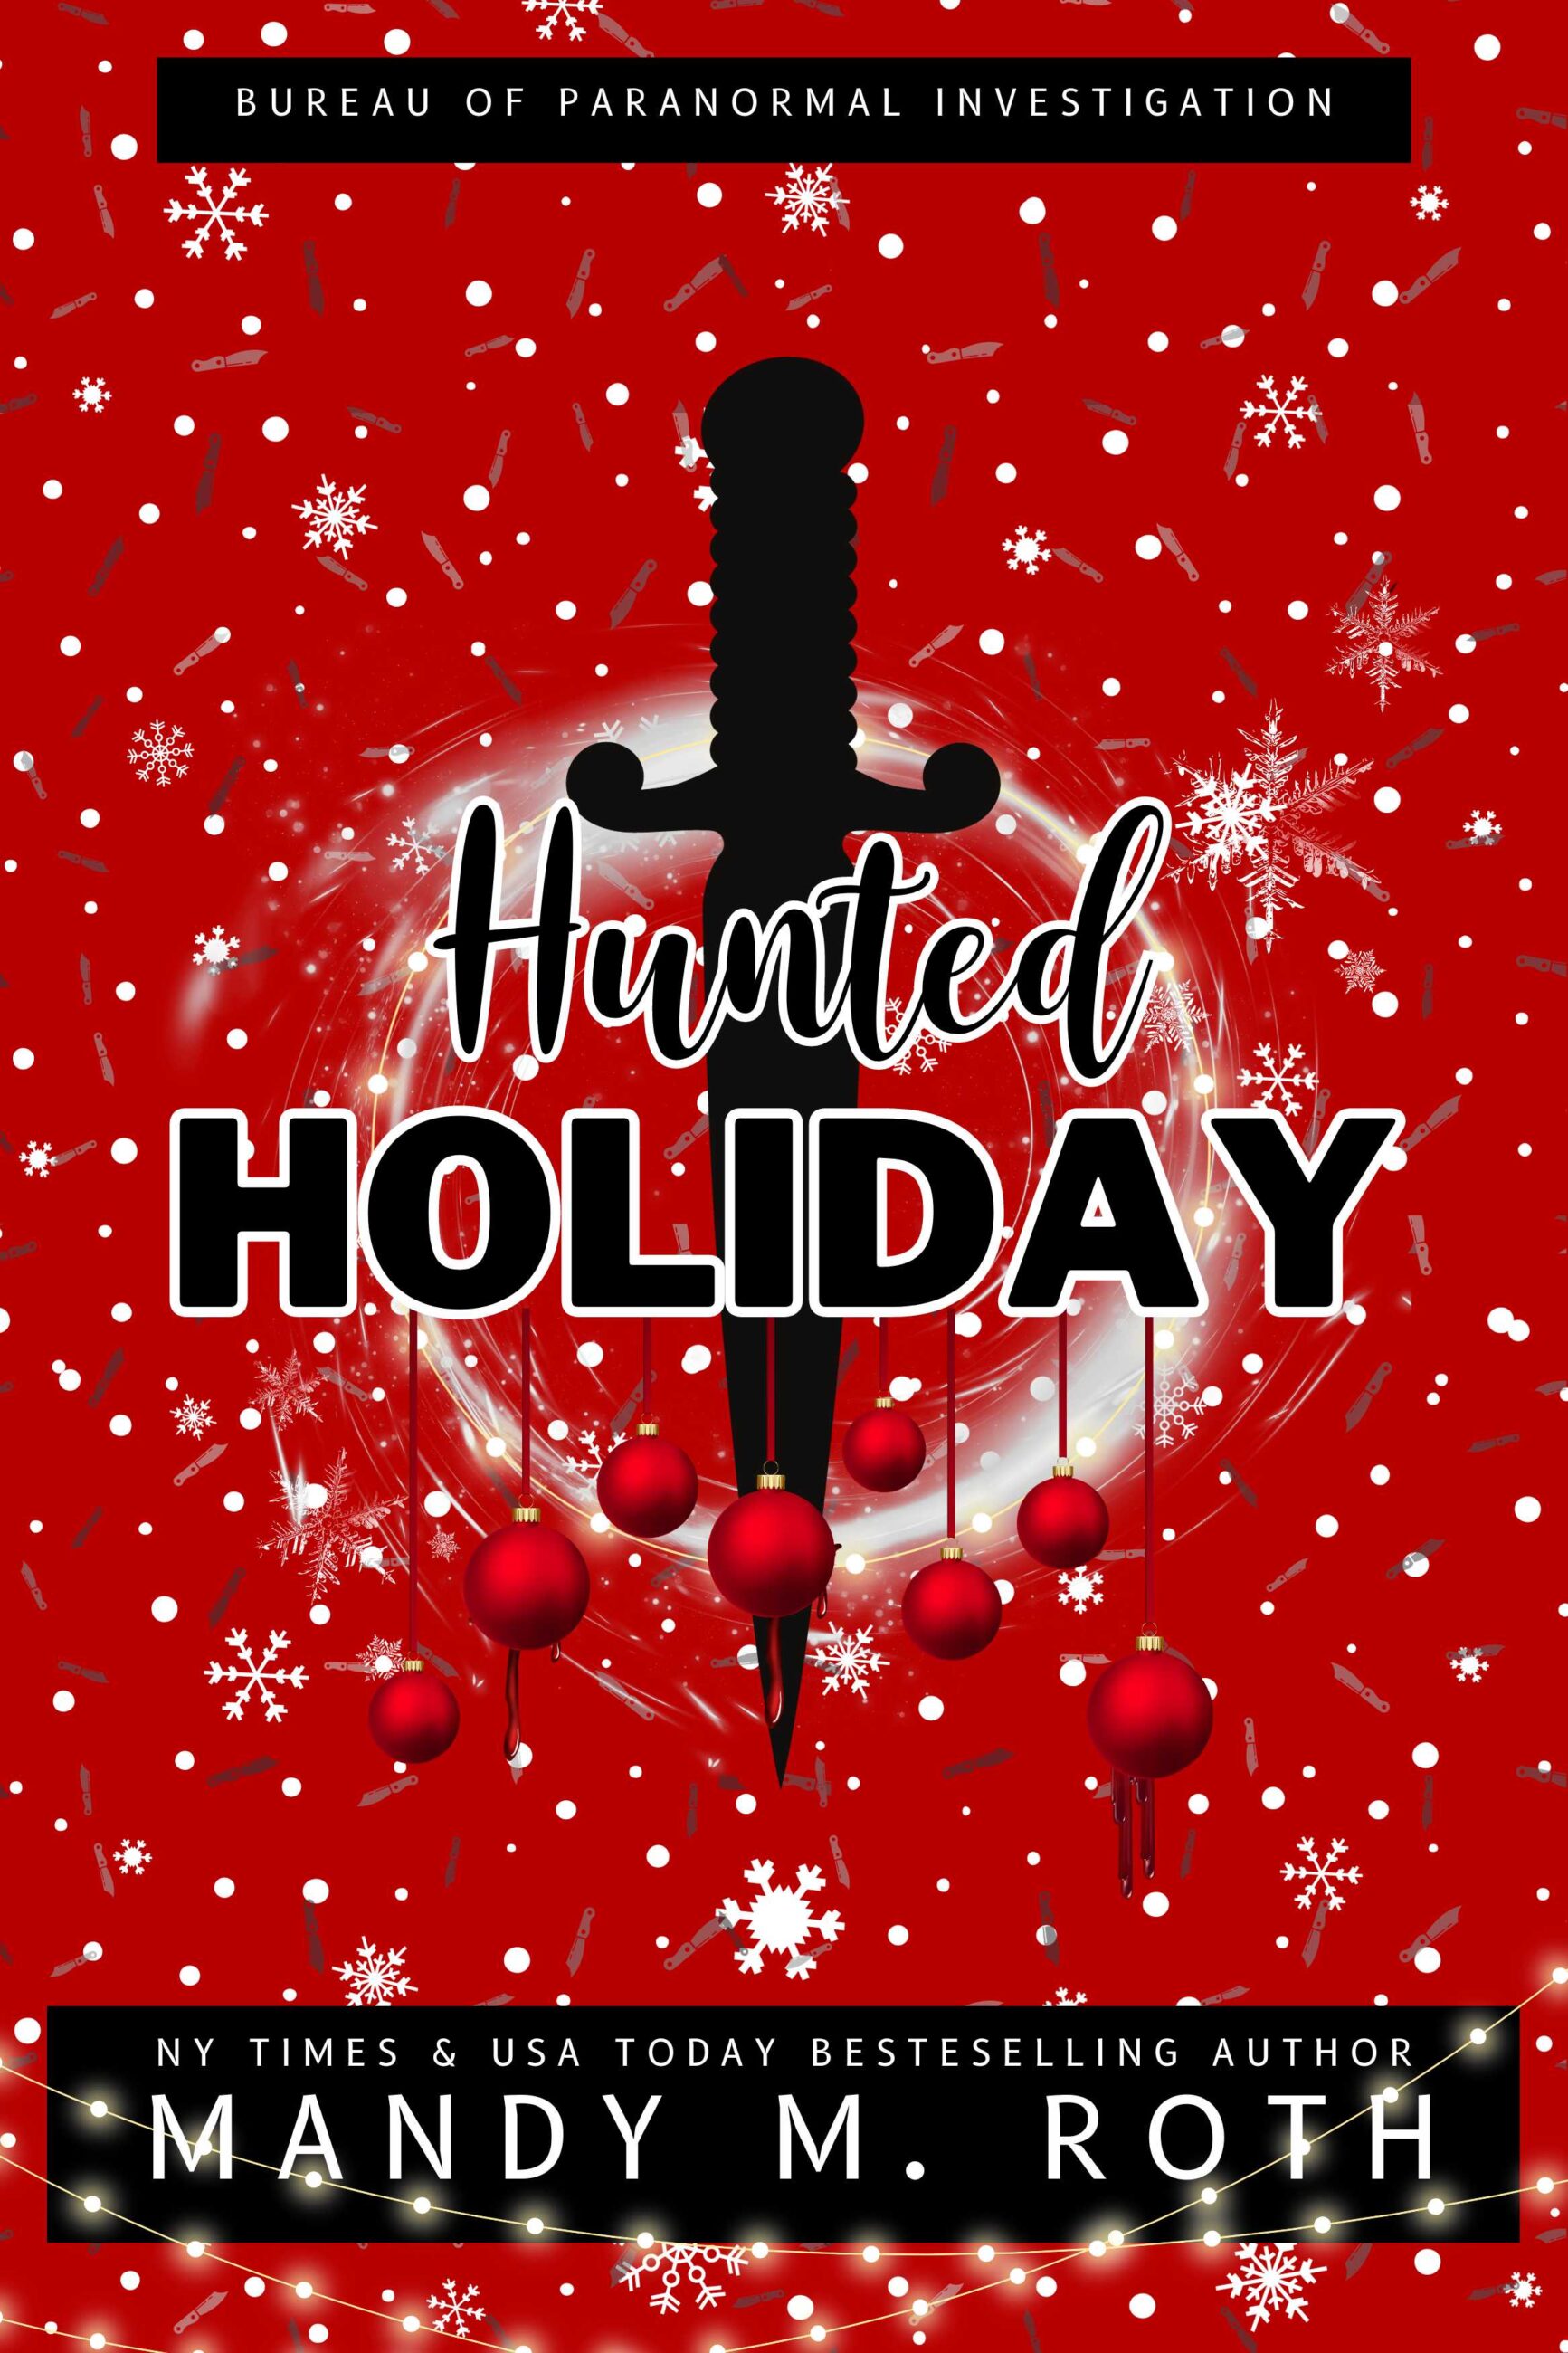 Hunted Holiday Red72LG